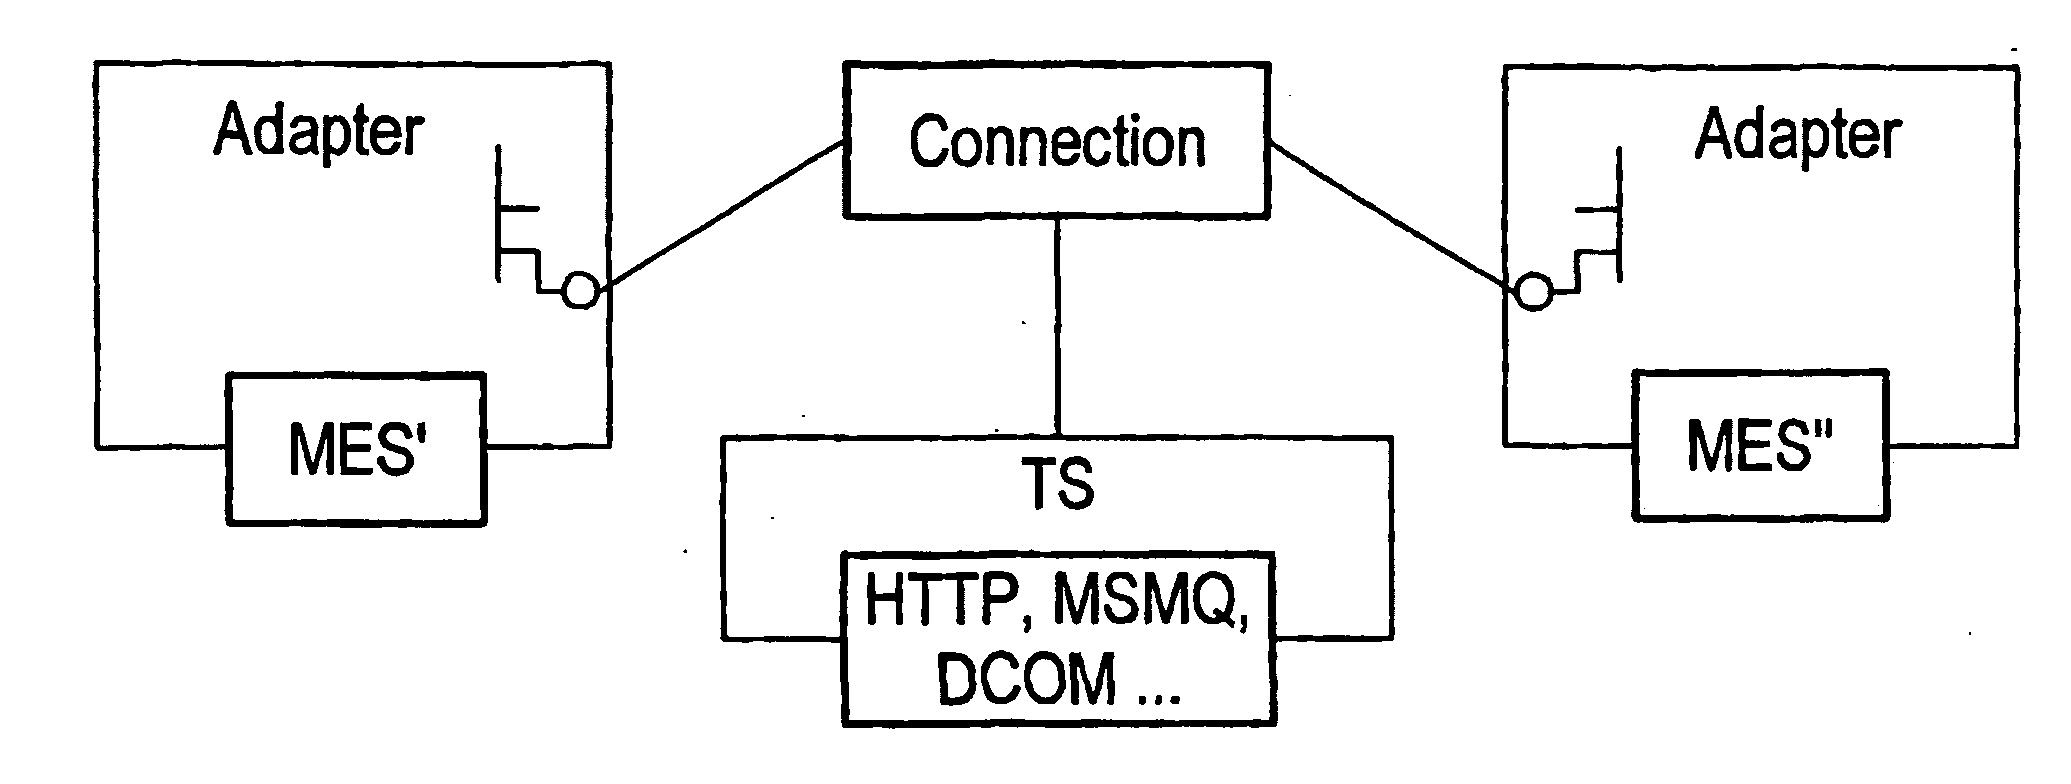 System and method for communicating between software applications, particularly mes (manufacturing execution system) applications